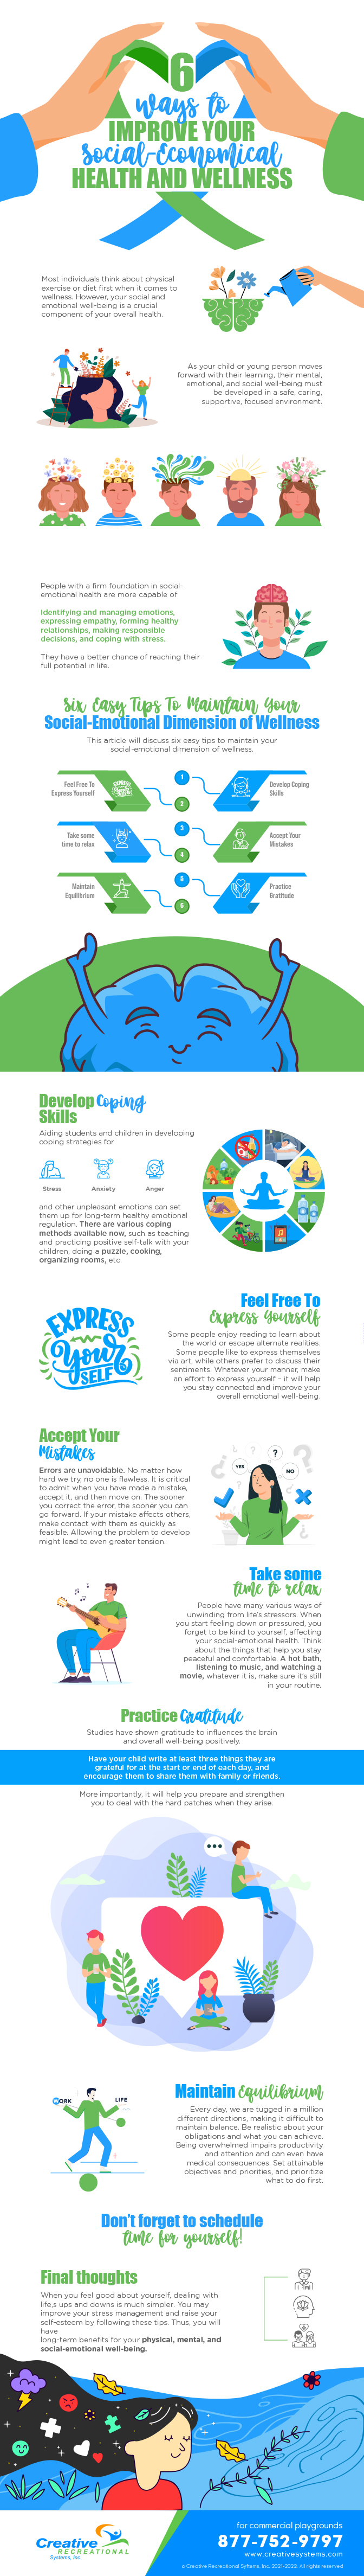 6_Tips_To_Improve_Your_Social